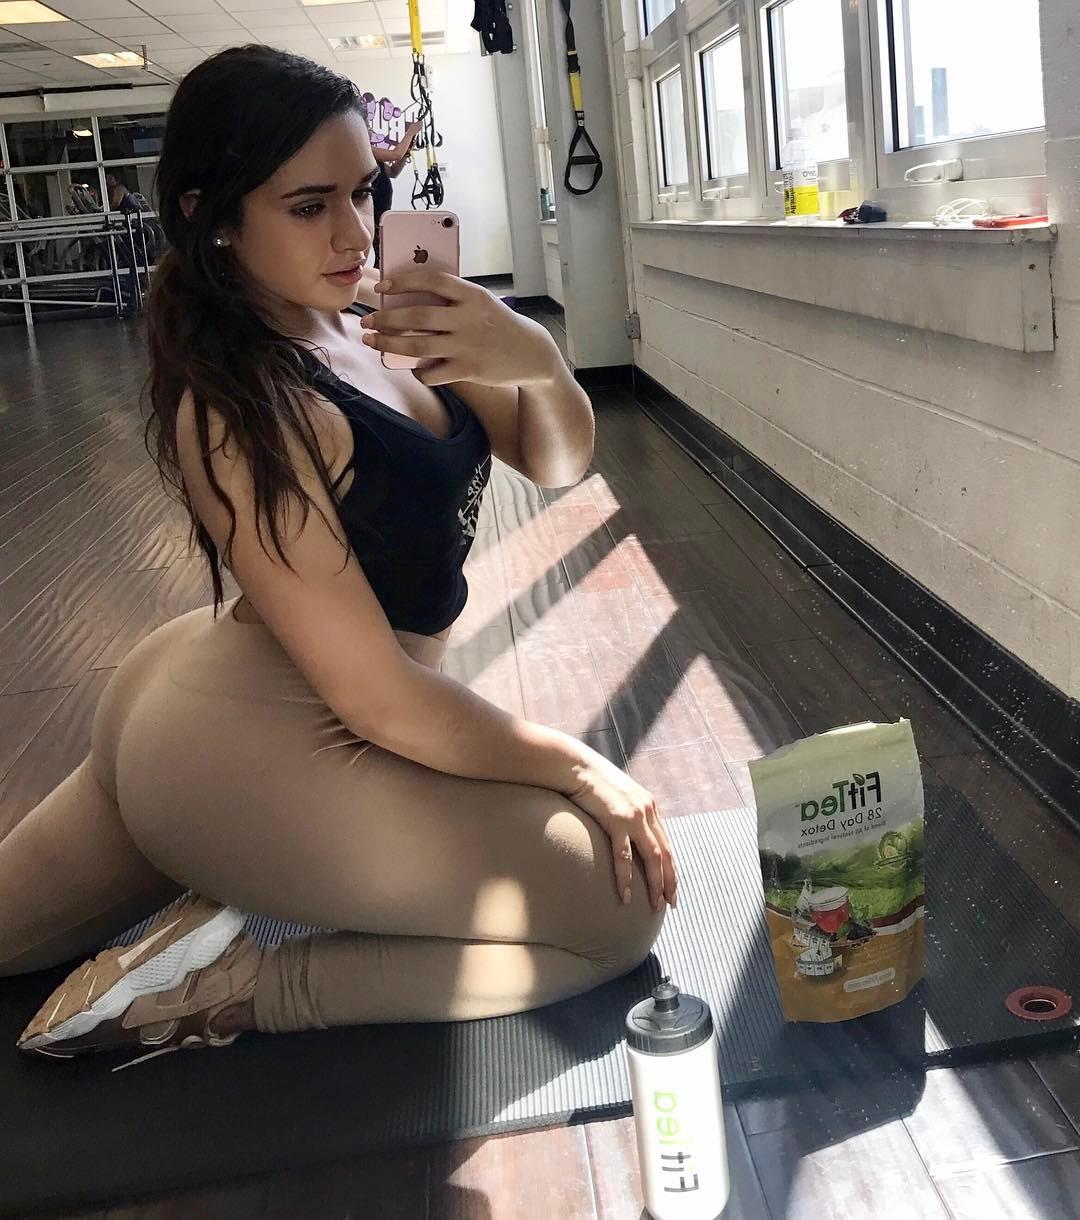 Ashley Ortiz Big Booty Sport Picture and Photo